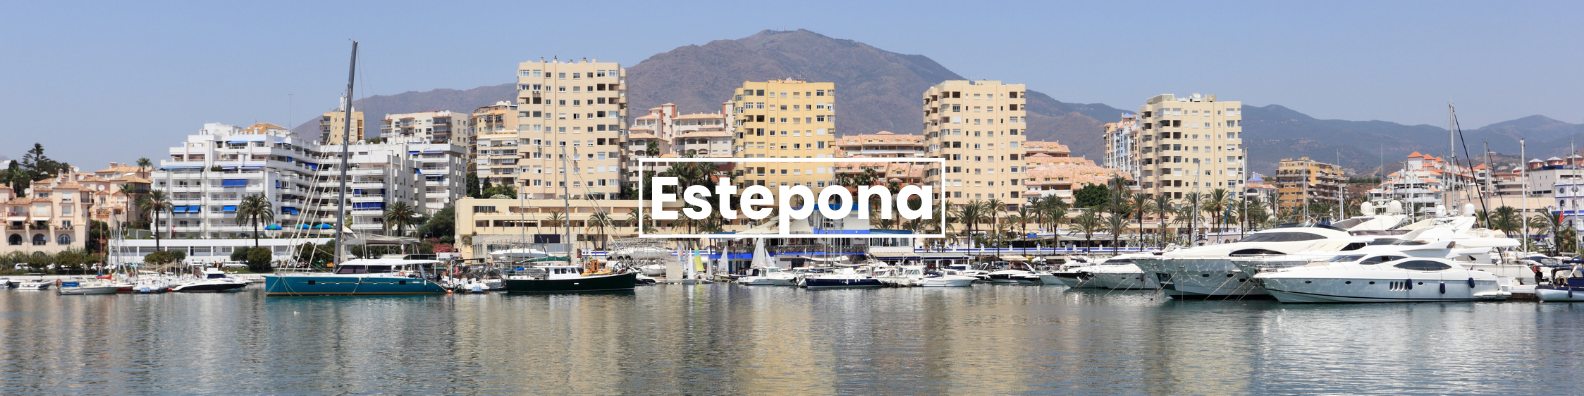 a city skyline with the word estepona on it Barter's Travelnet 